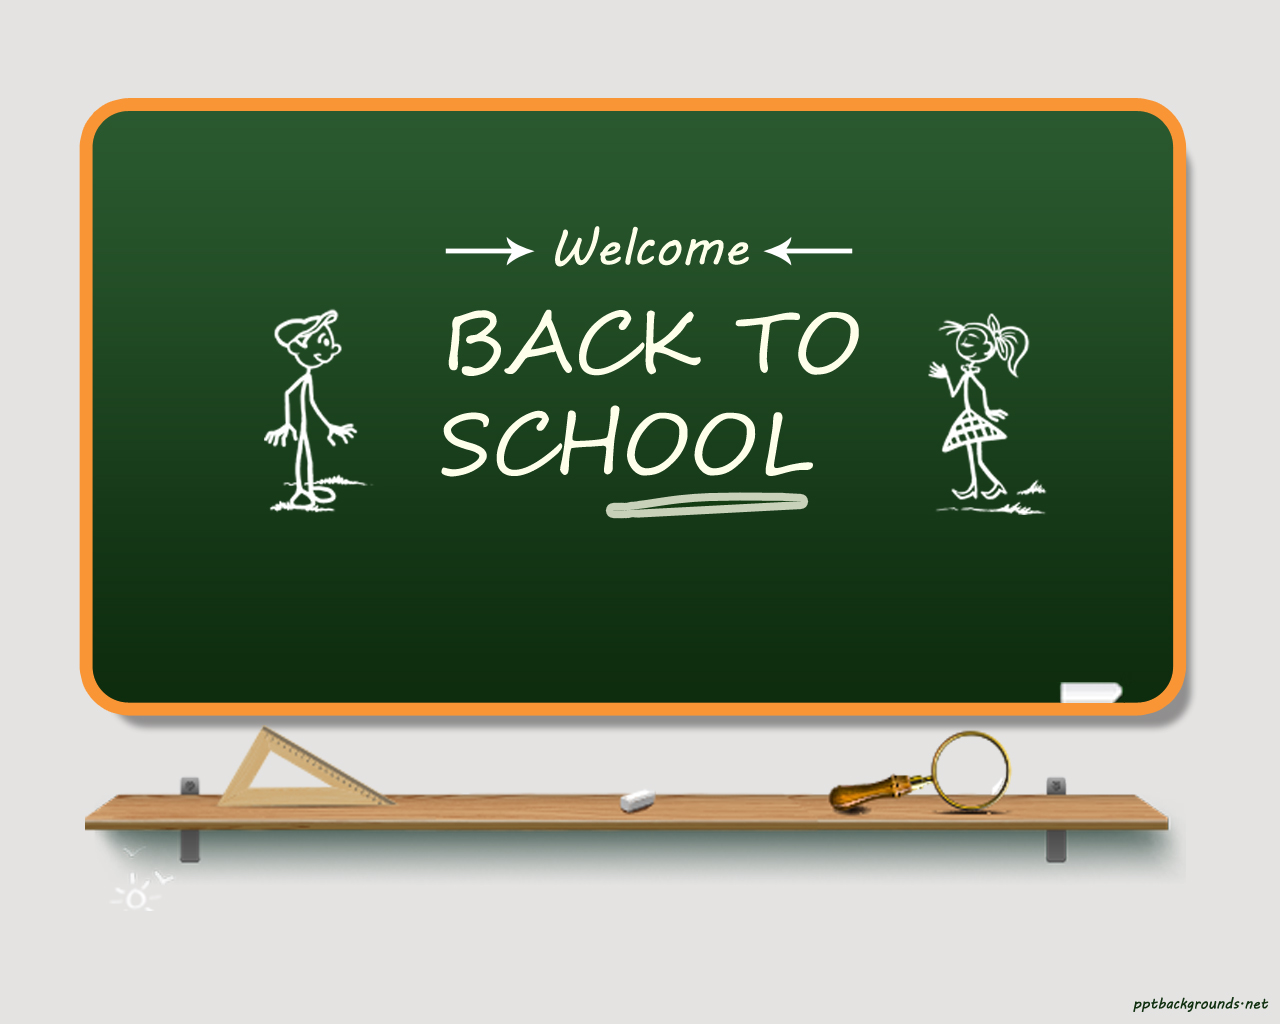 Back To School 24 - 24 Background For PowerPoint - Education Intended For Back To School Powerpoint Template